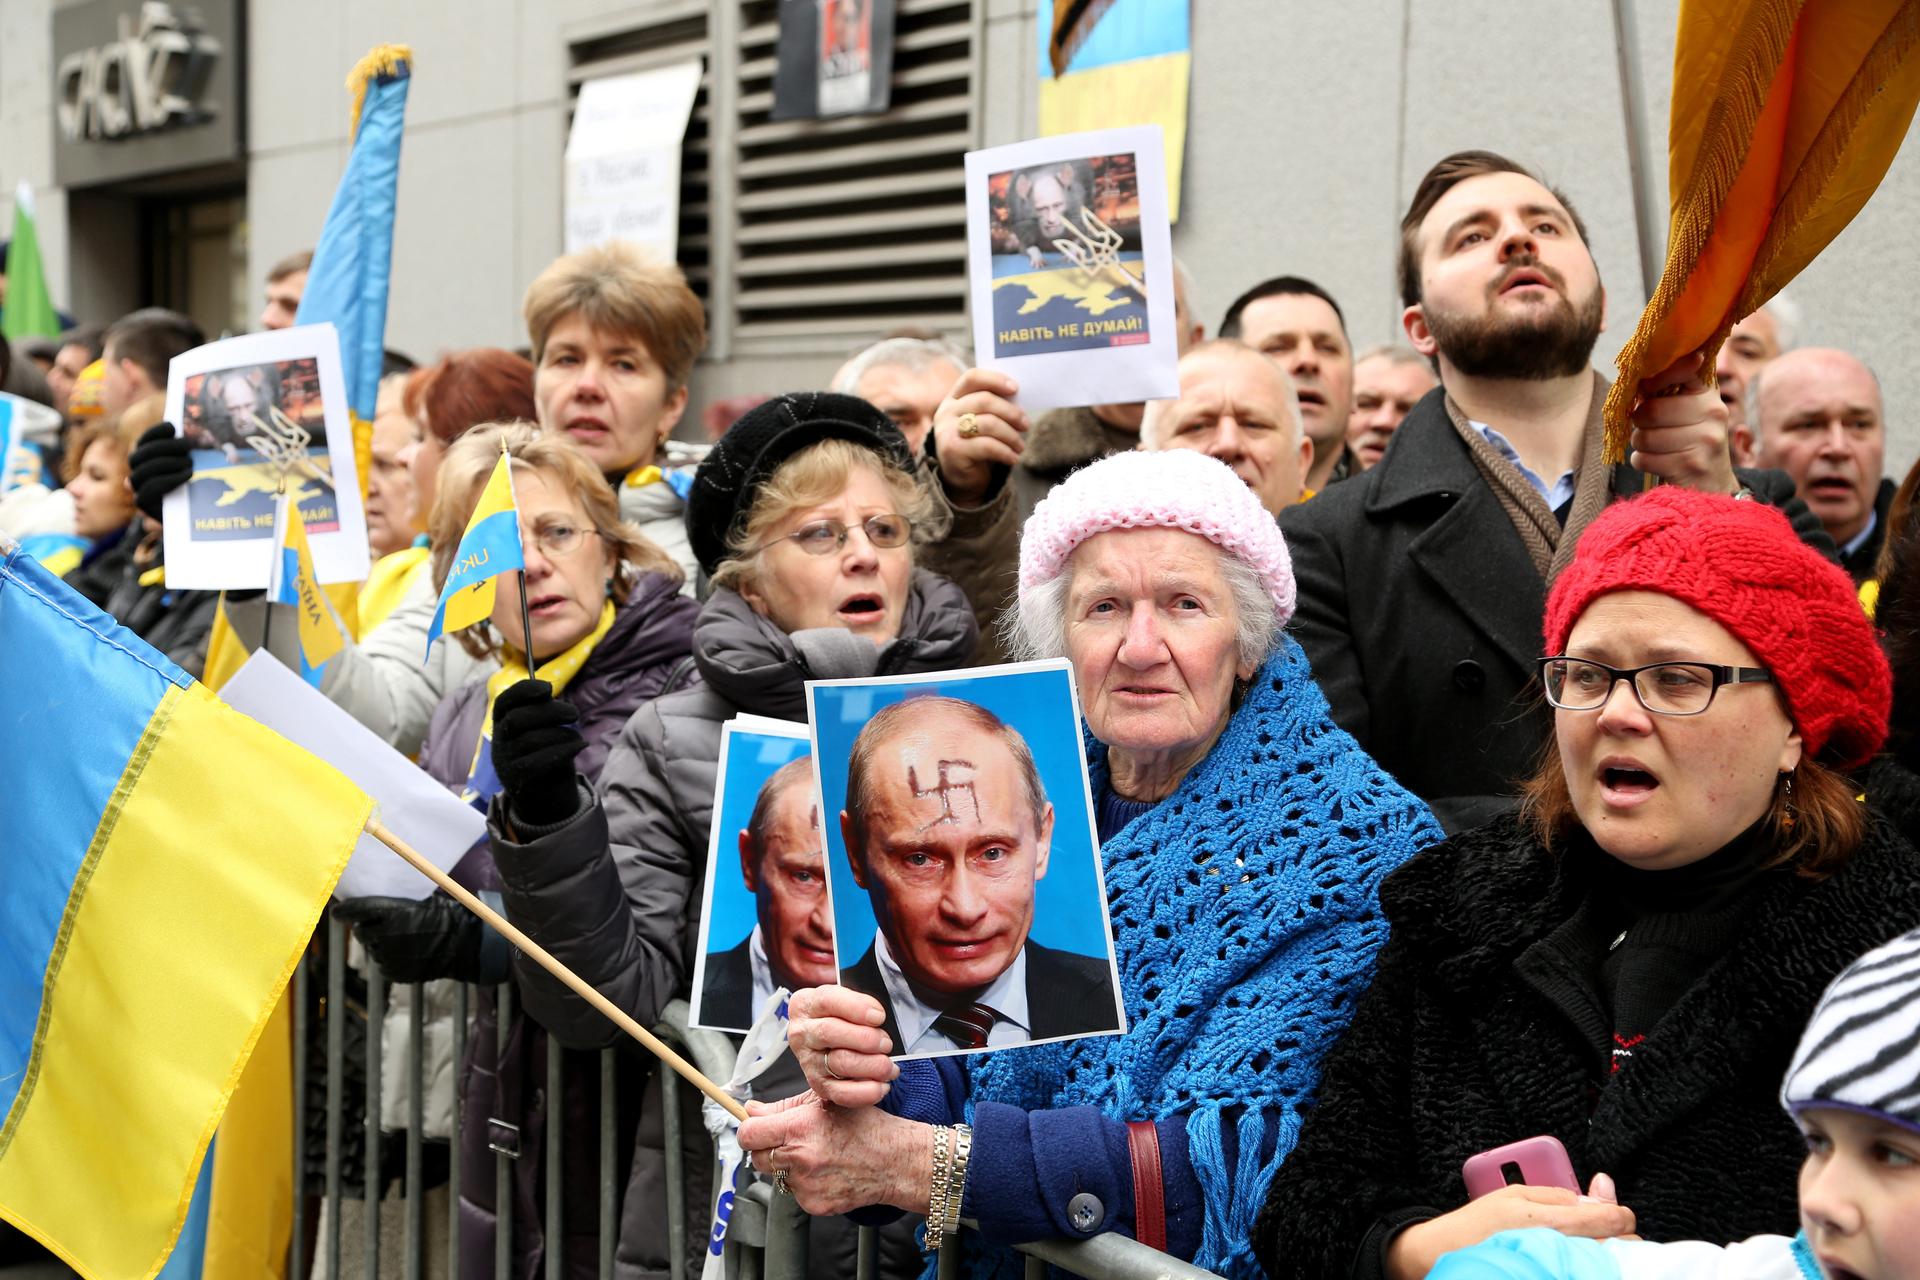 Ukrainian Americans attend a New York City rally on March 2, 2014, protesting Russia’s annexation of Crimea.